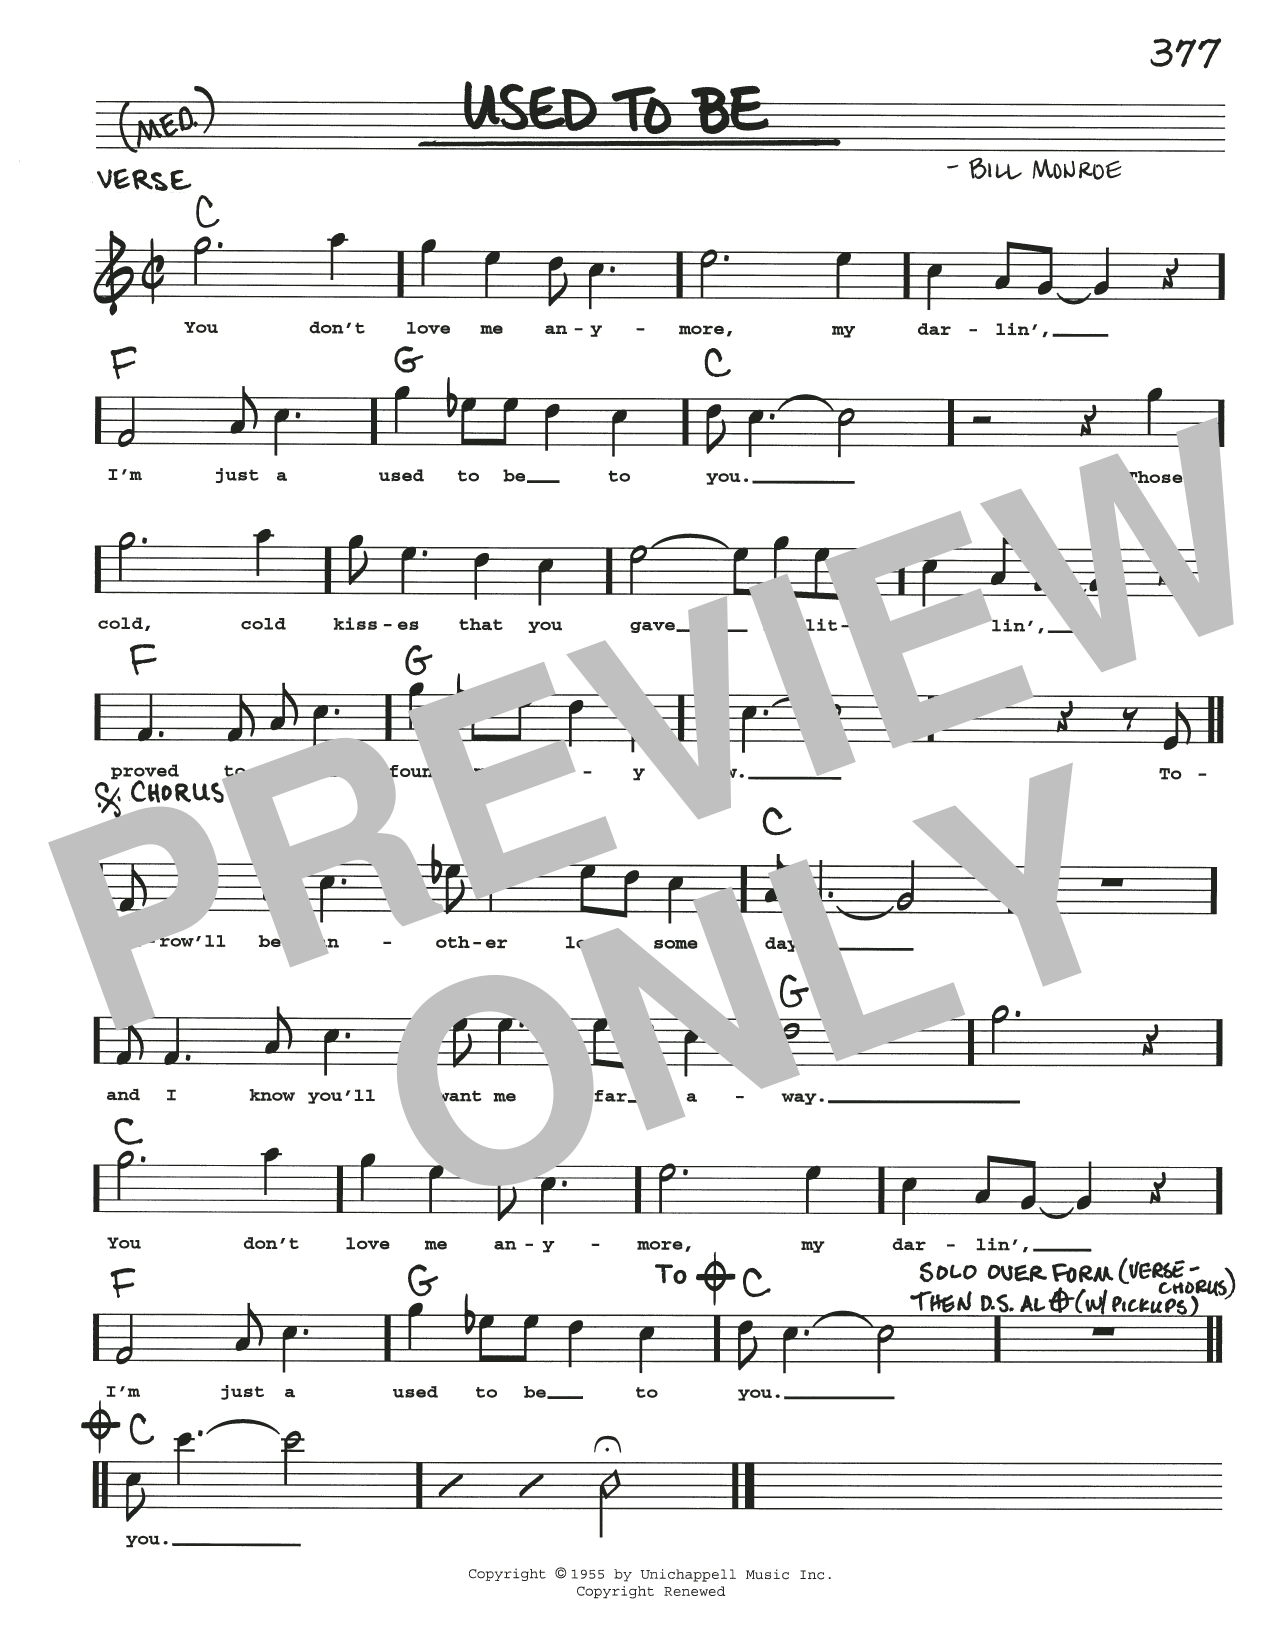 Download Bill Monroe Used To Be Sheet Music